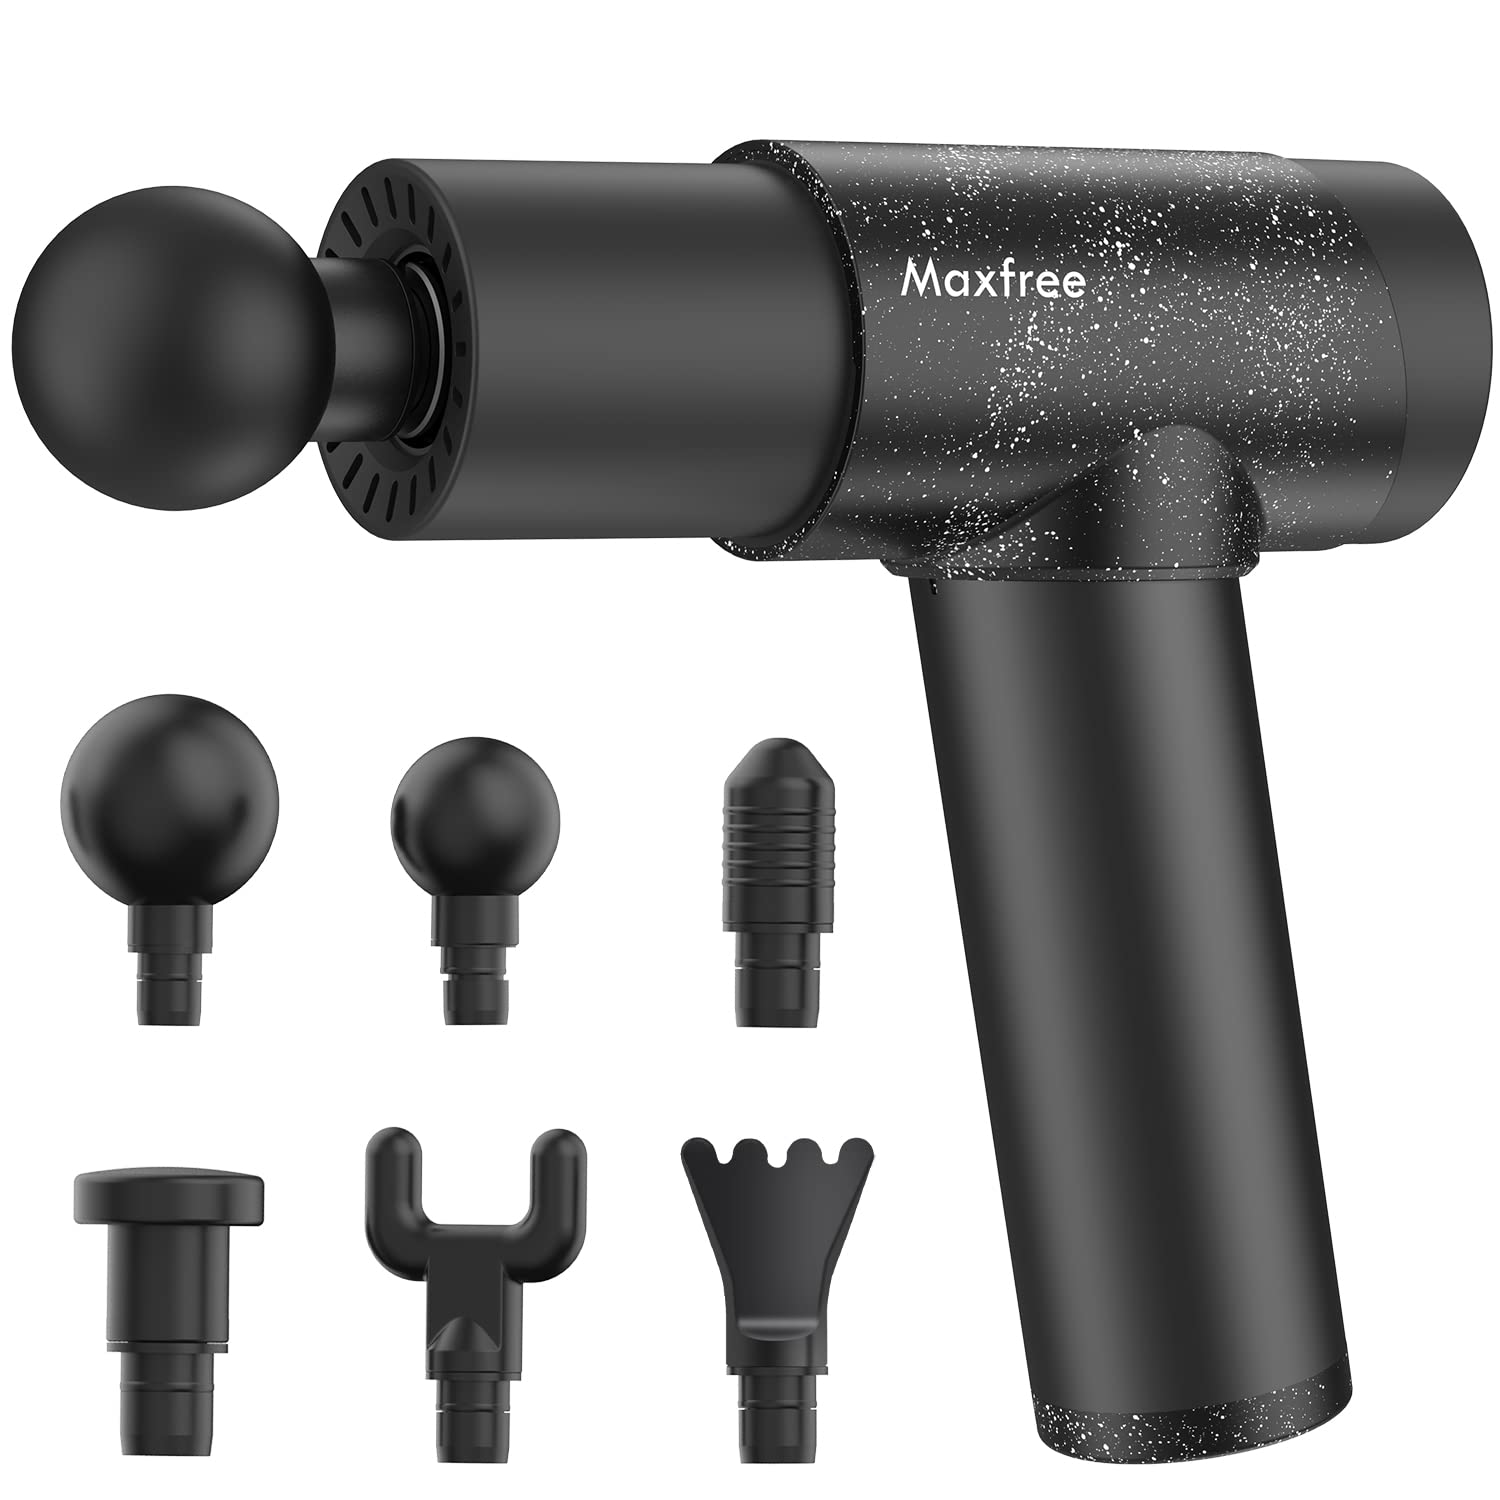 Maxfree Handheld Muscle Massage Gun Deep Tissue For Athletes Percussion Electric Massagers For